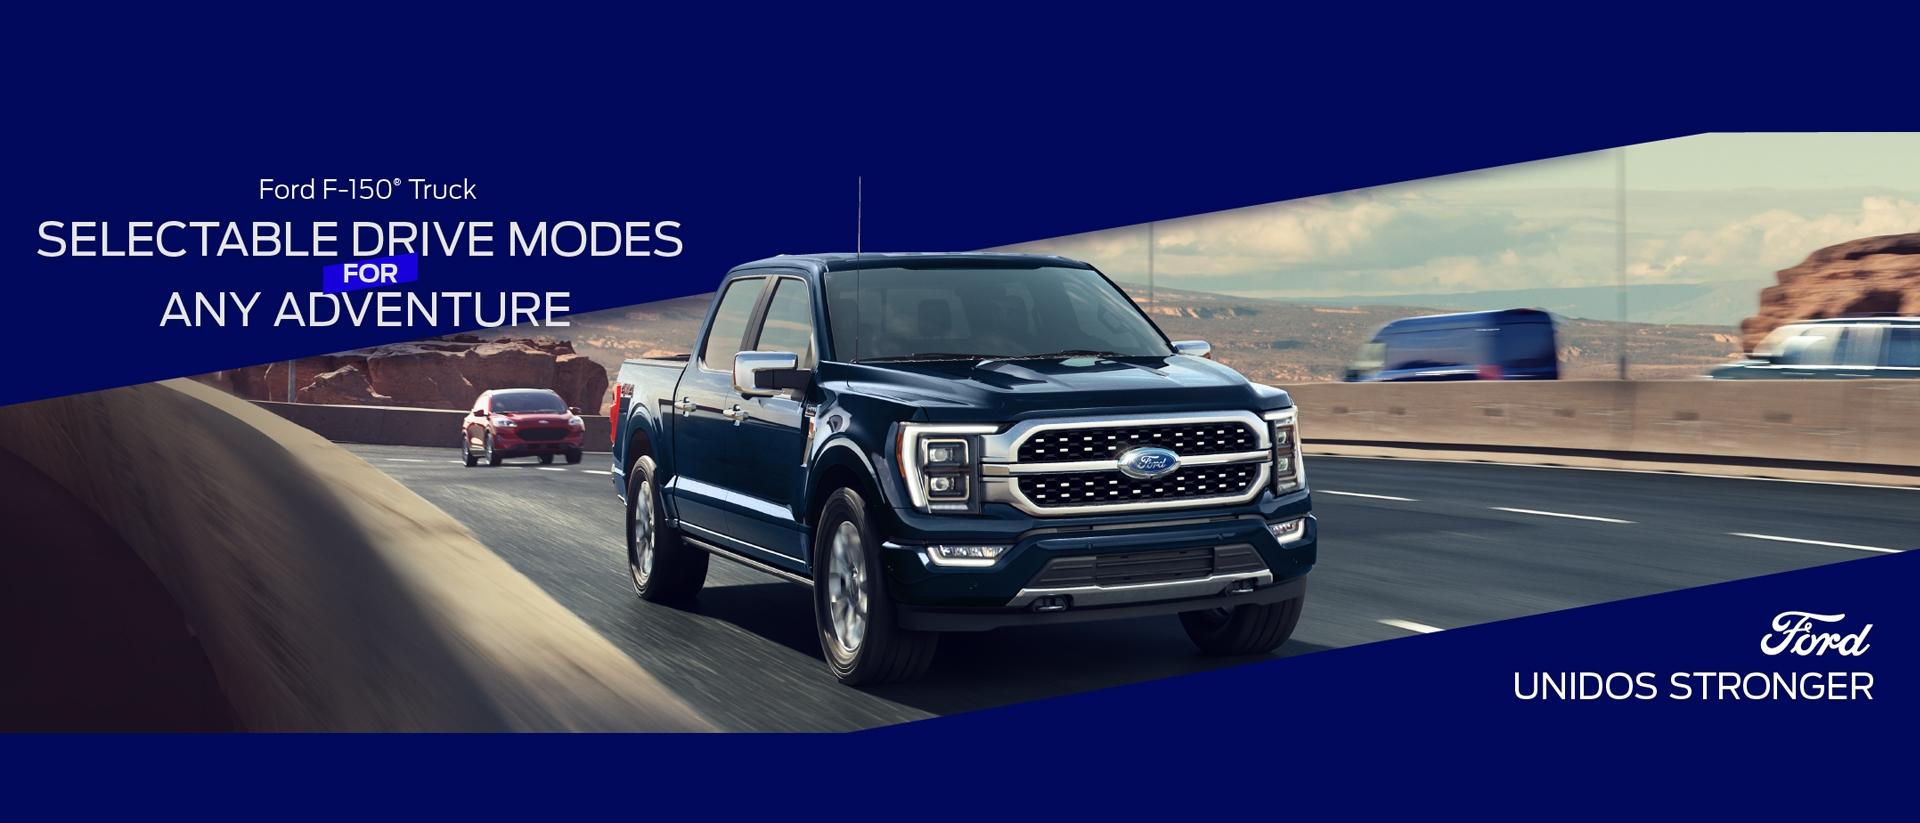 Unidos Stronger | Southern California Ford Dealers